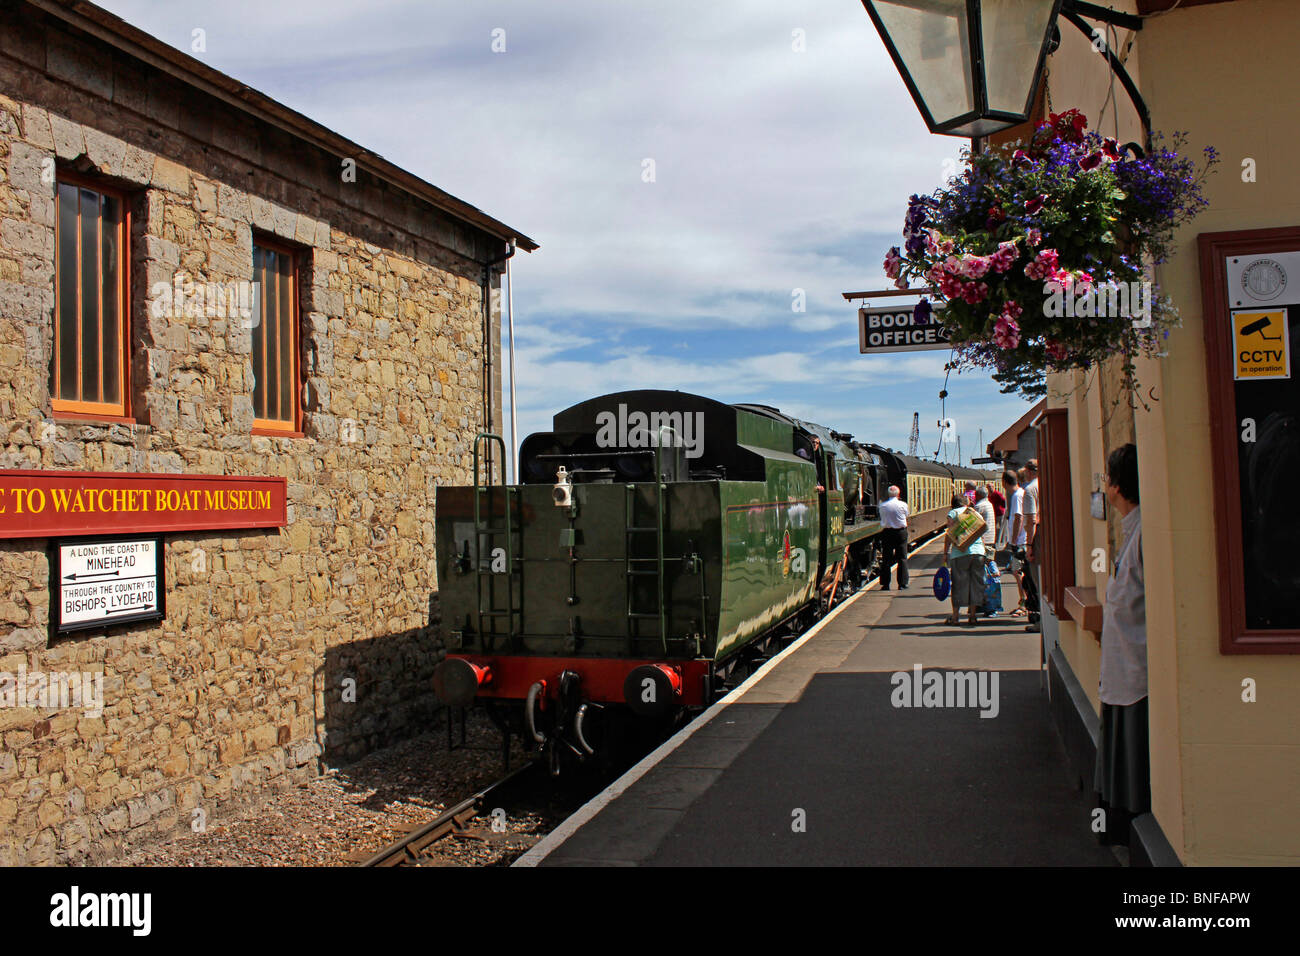 A steam train hauled by rebuilt Bulleid locomotive no 34046 arrives at Watchet railway station on the West Somerset Railway Stock Photo